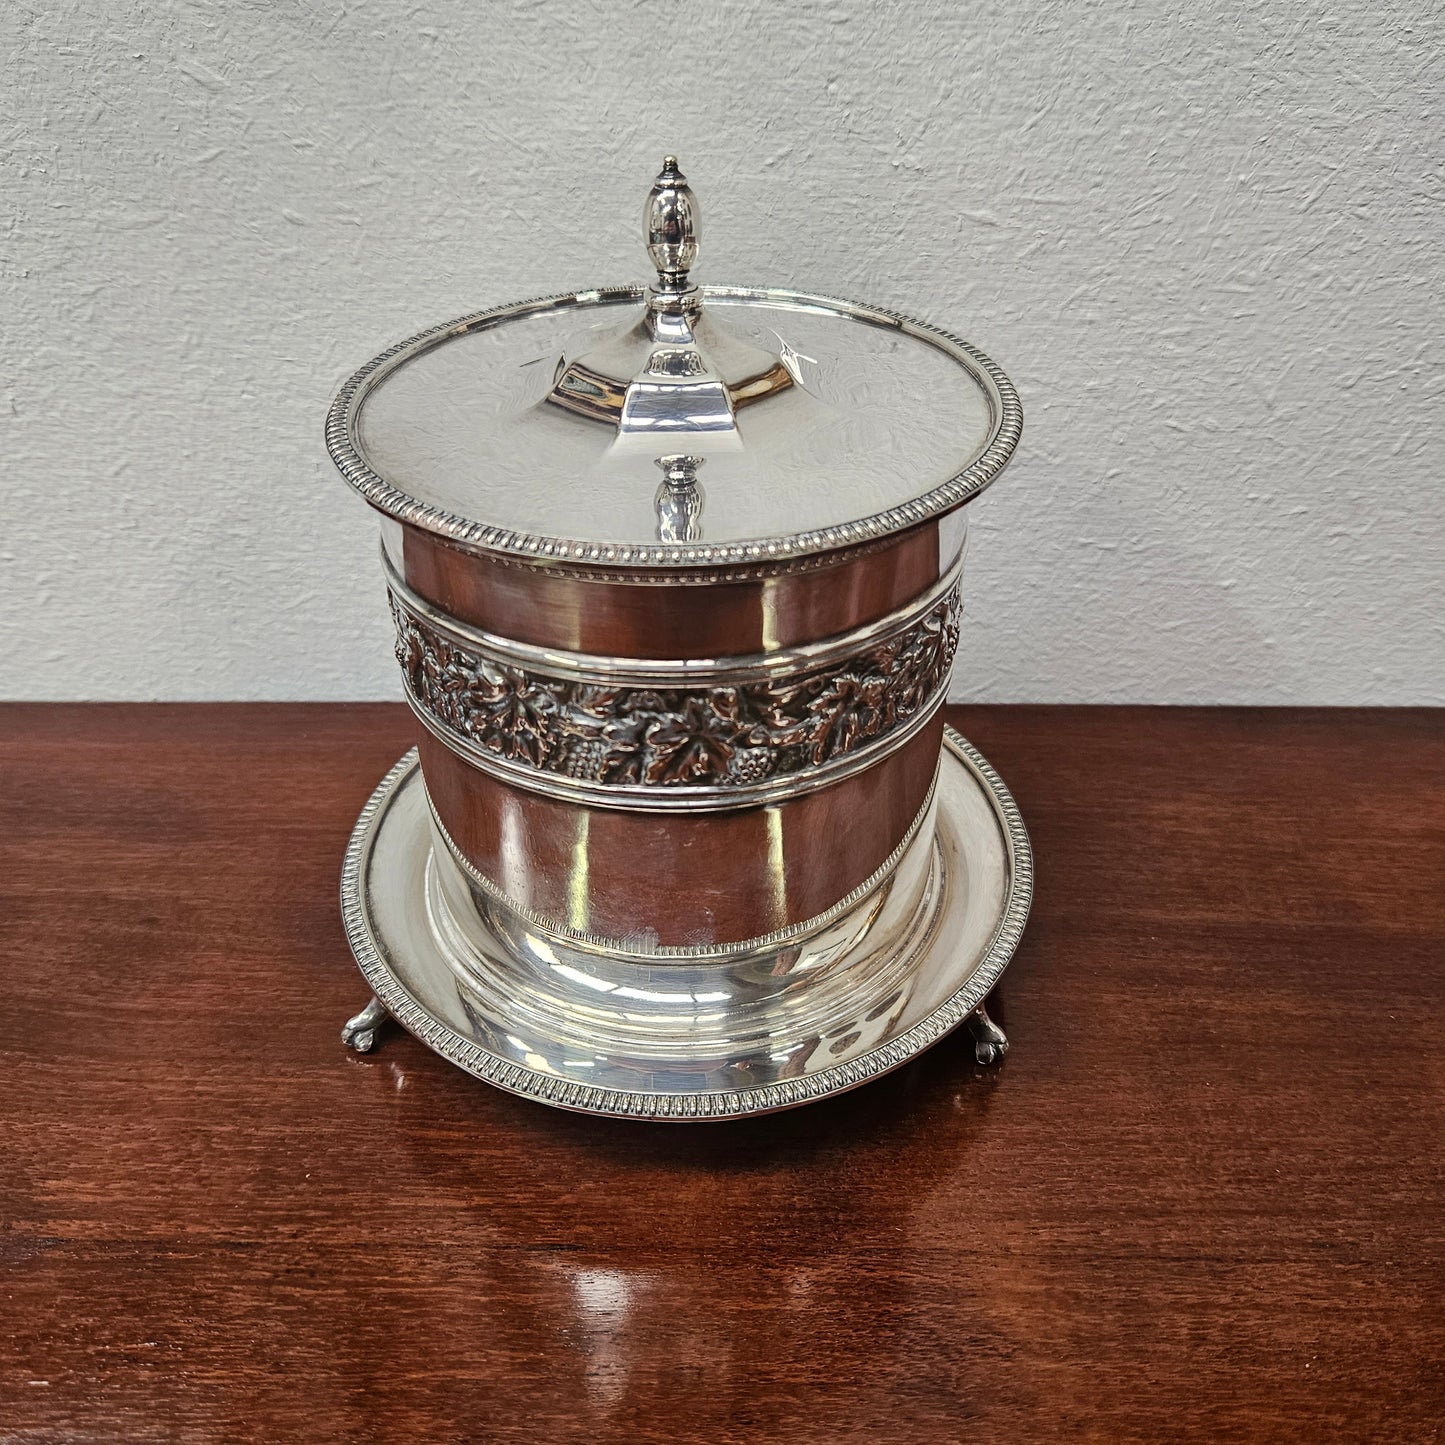 Antique Silver Plated Biscuit Barrel